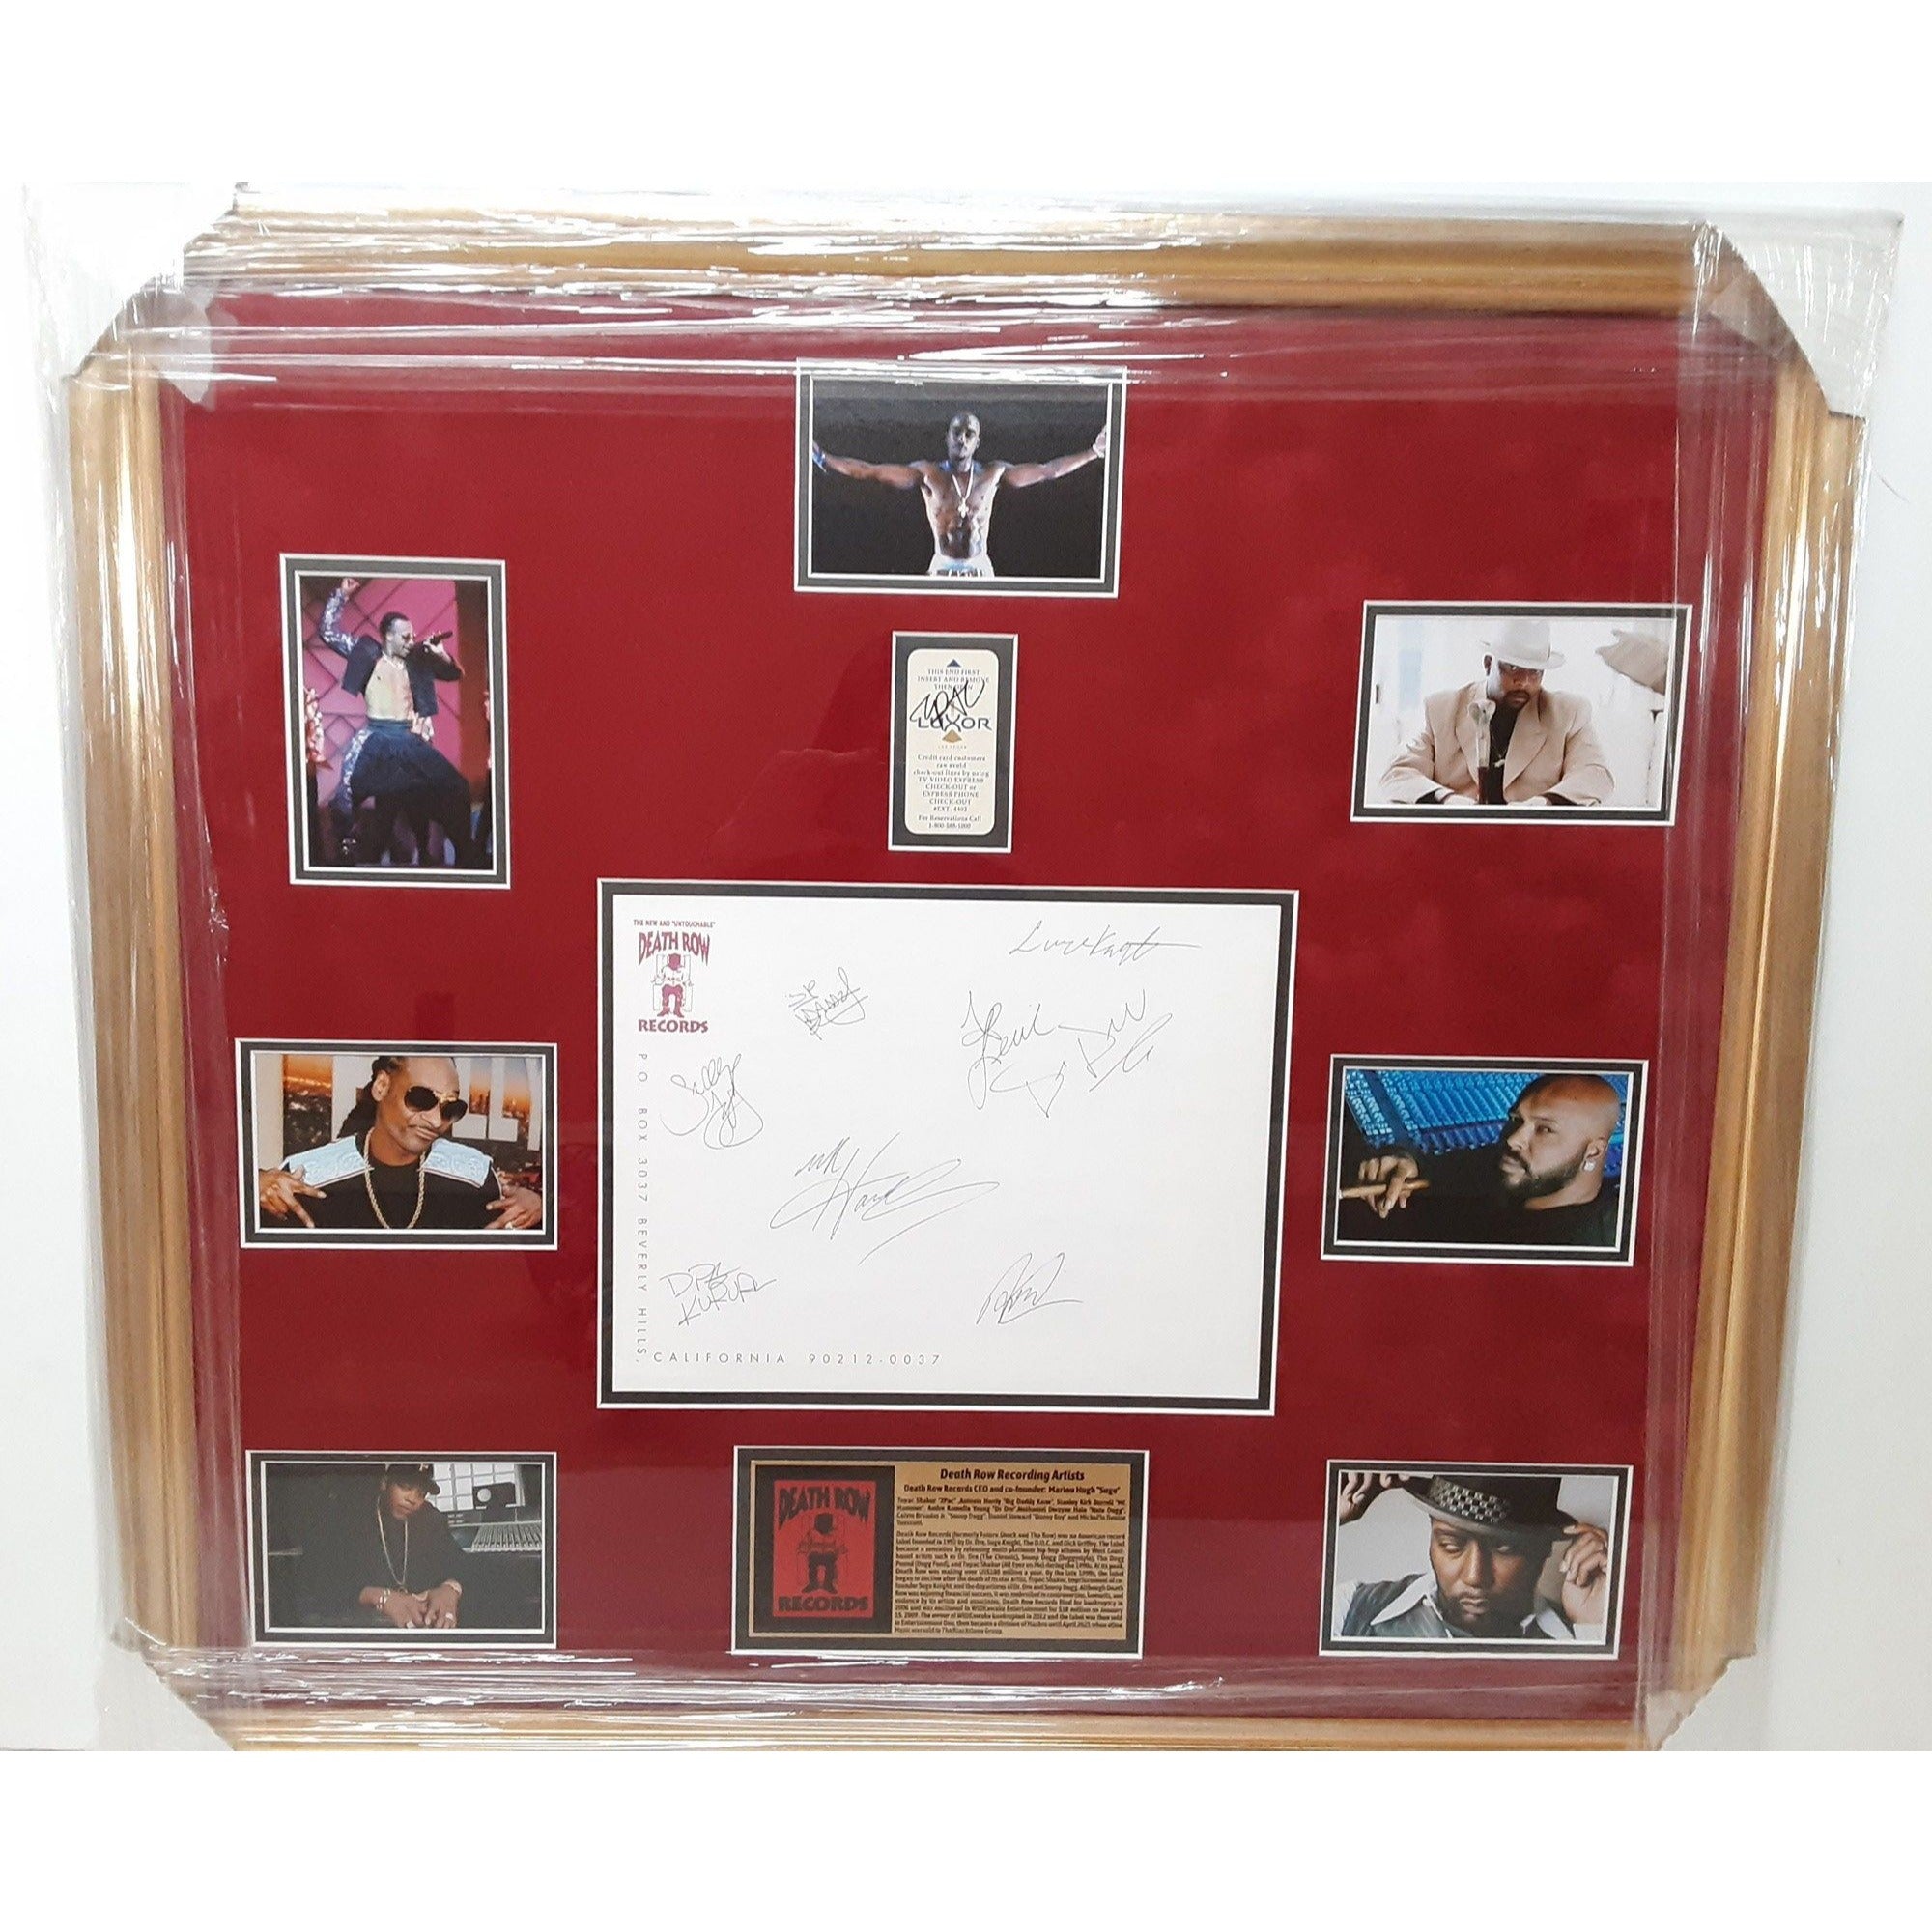 Suge Knight, Tupac Shakur, MC Hammer, Snoop Dogg, Dr, Dre, Death Row OG stationery signed and framed